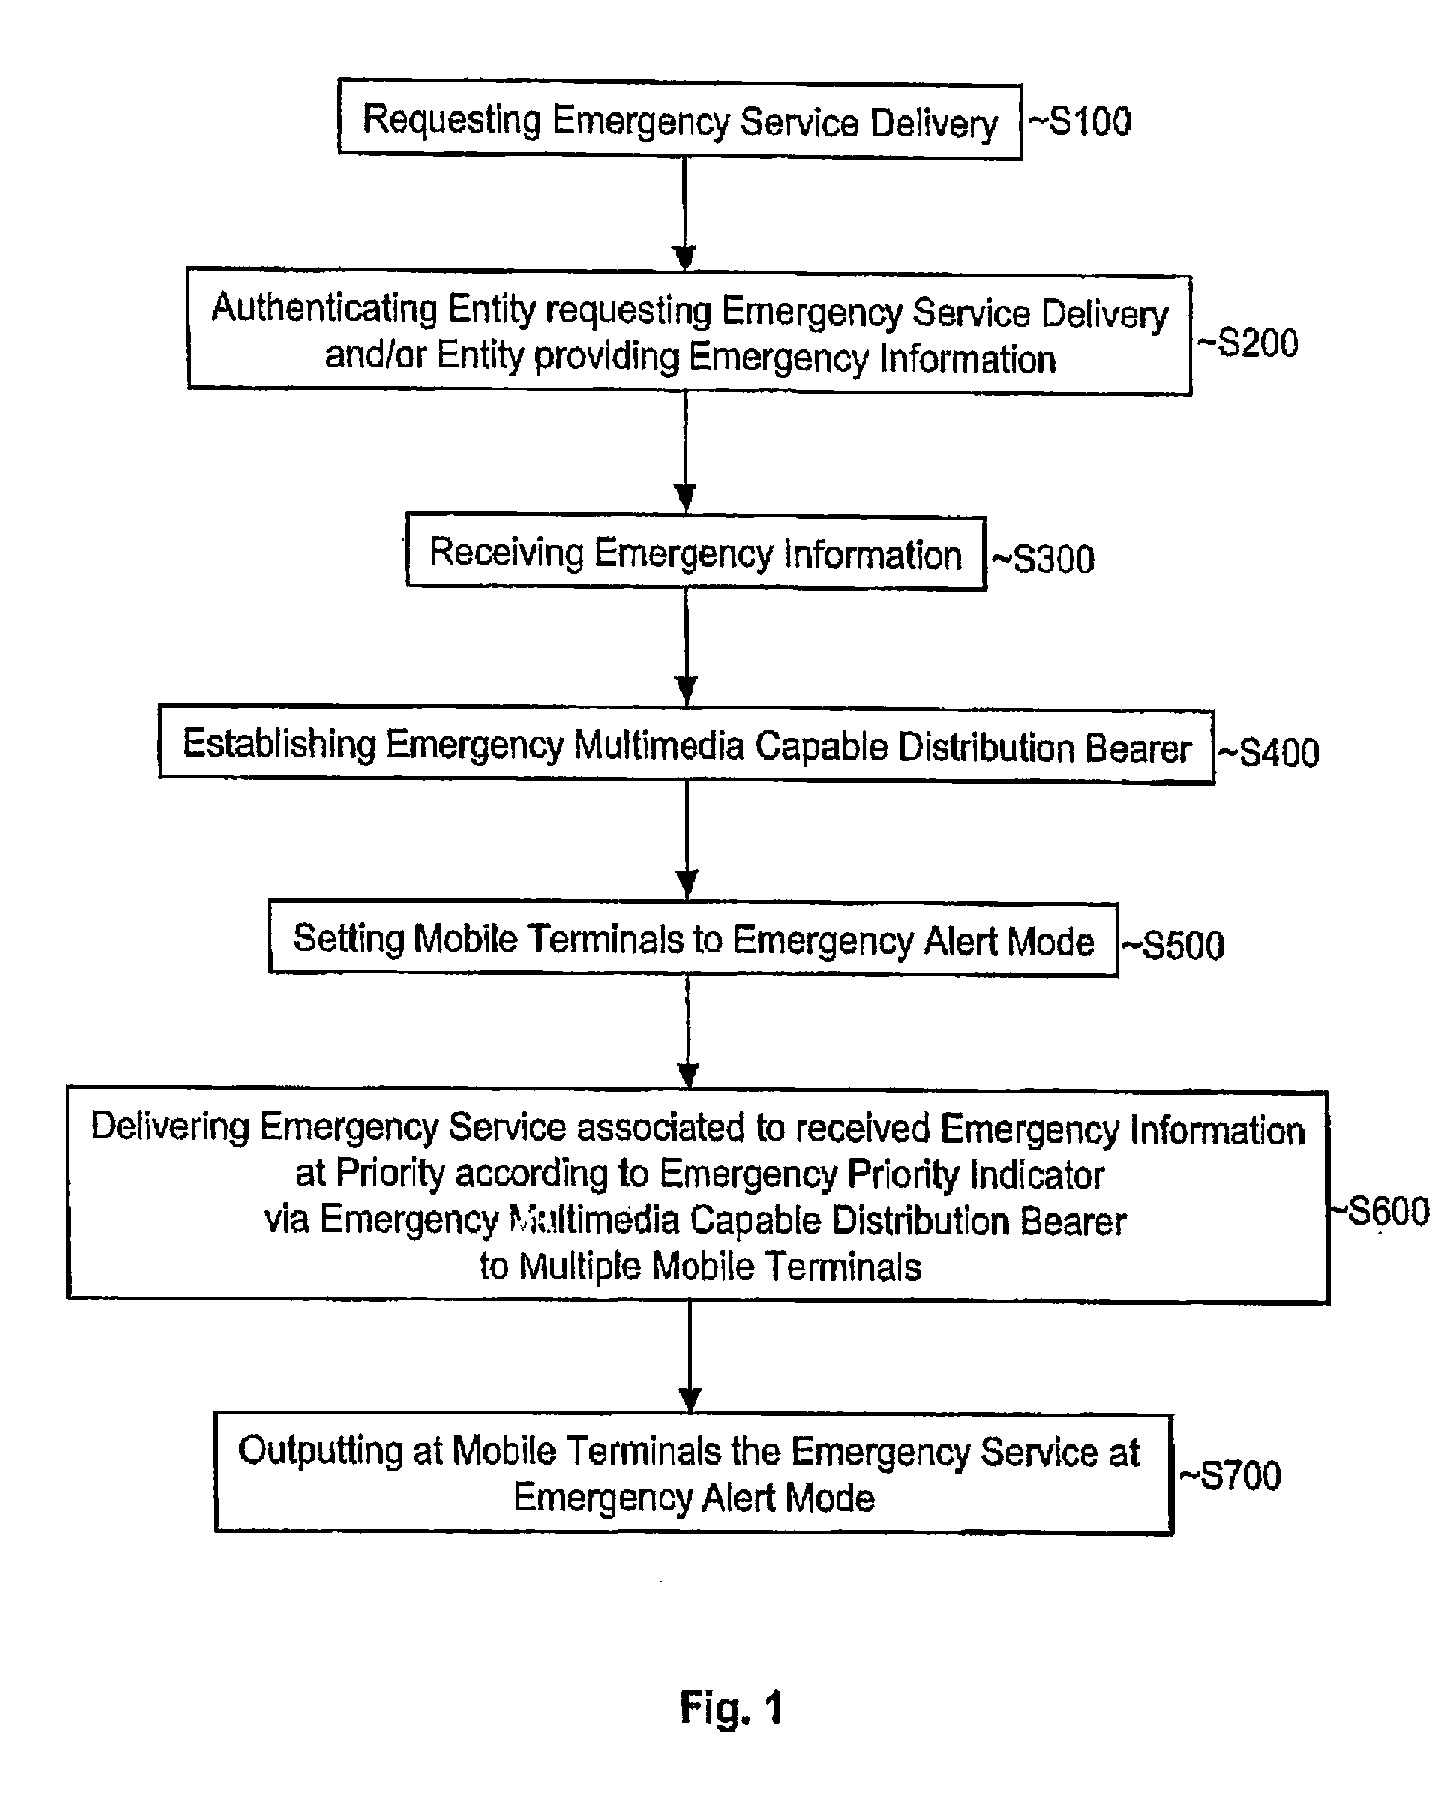 Method for Informing Multiple Mobile Terminals of an Emergency Event